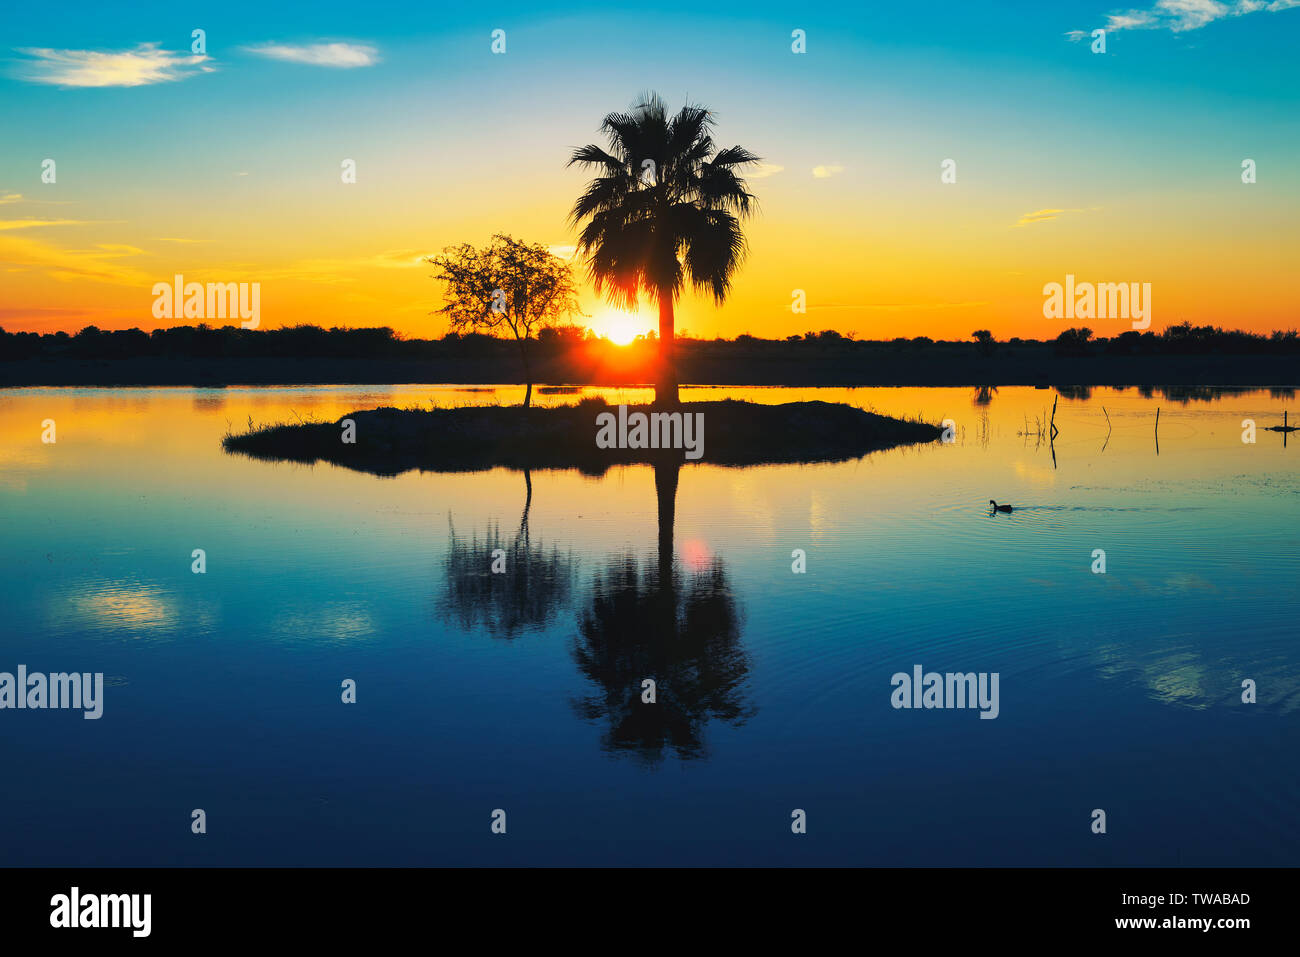 Palm tree silhouette with reflection in a lake at sunset, Namibia, Africa Stock Photo